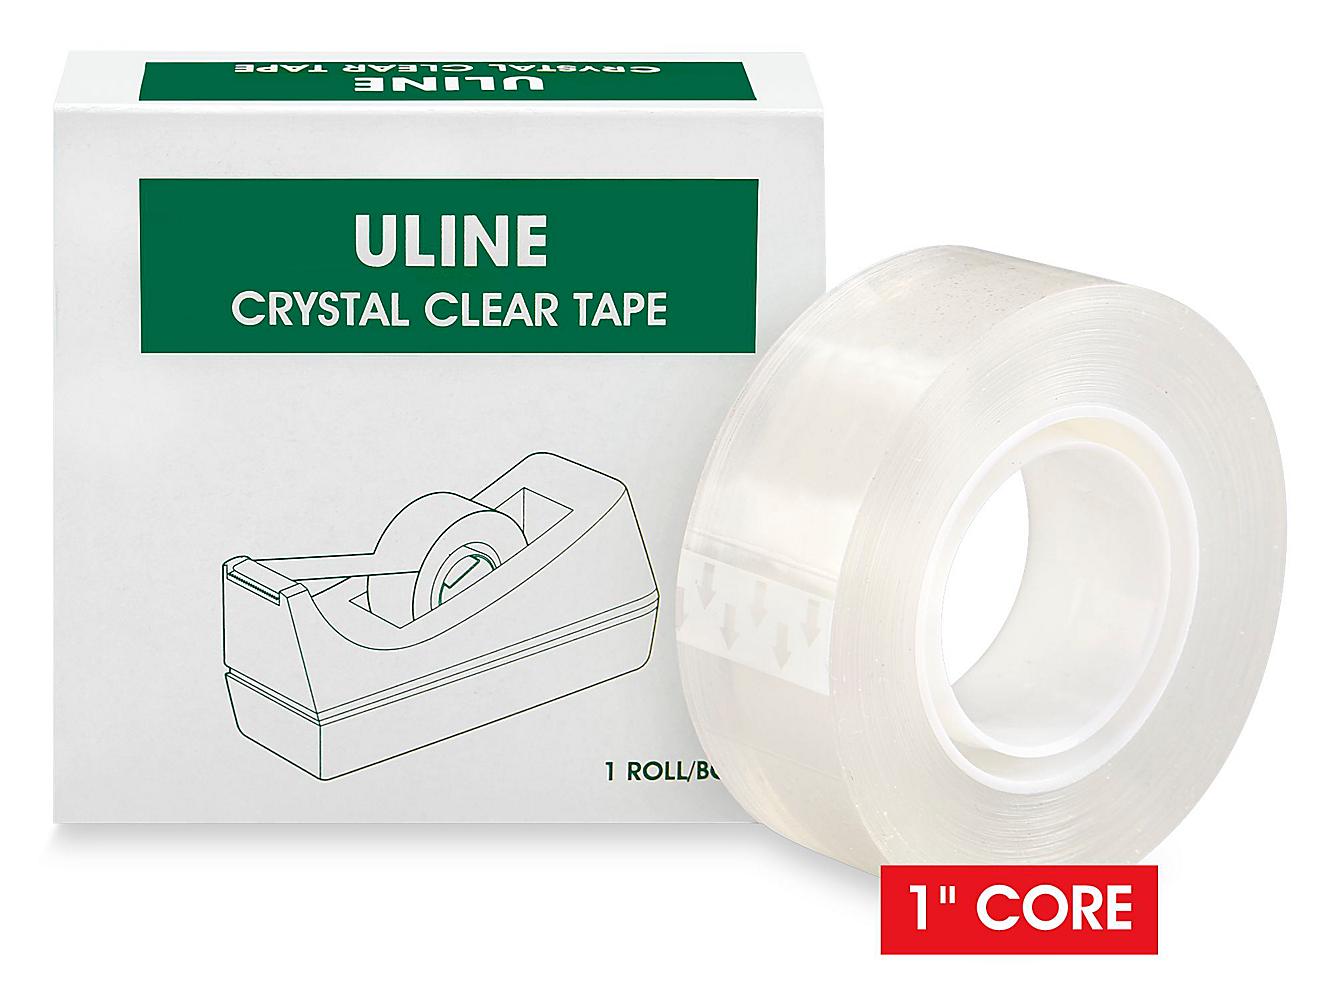 Uline Crystal Clear Tape - 3/4